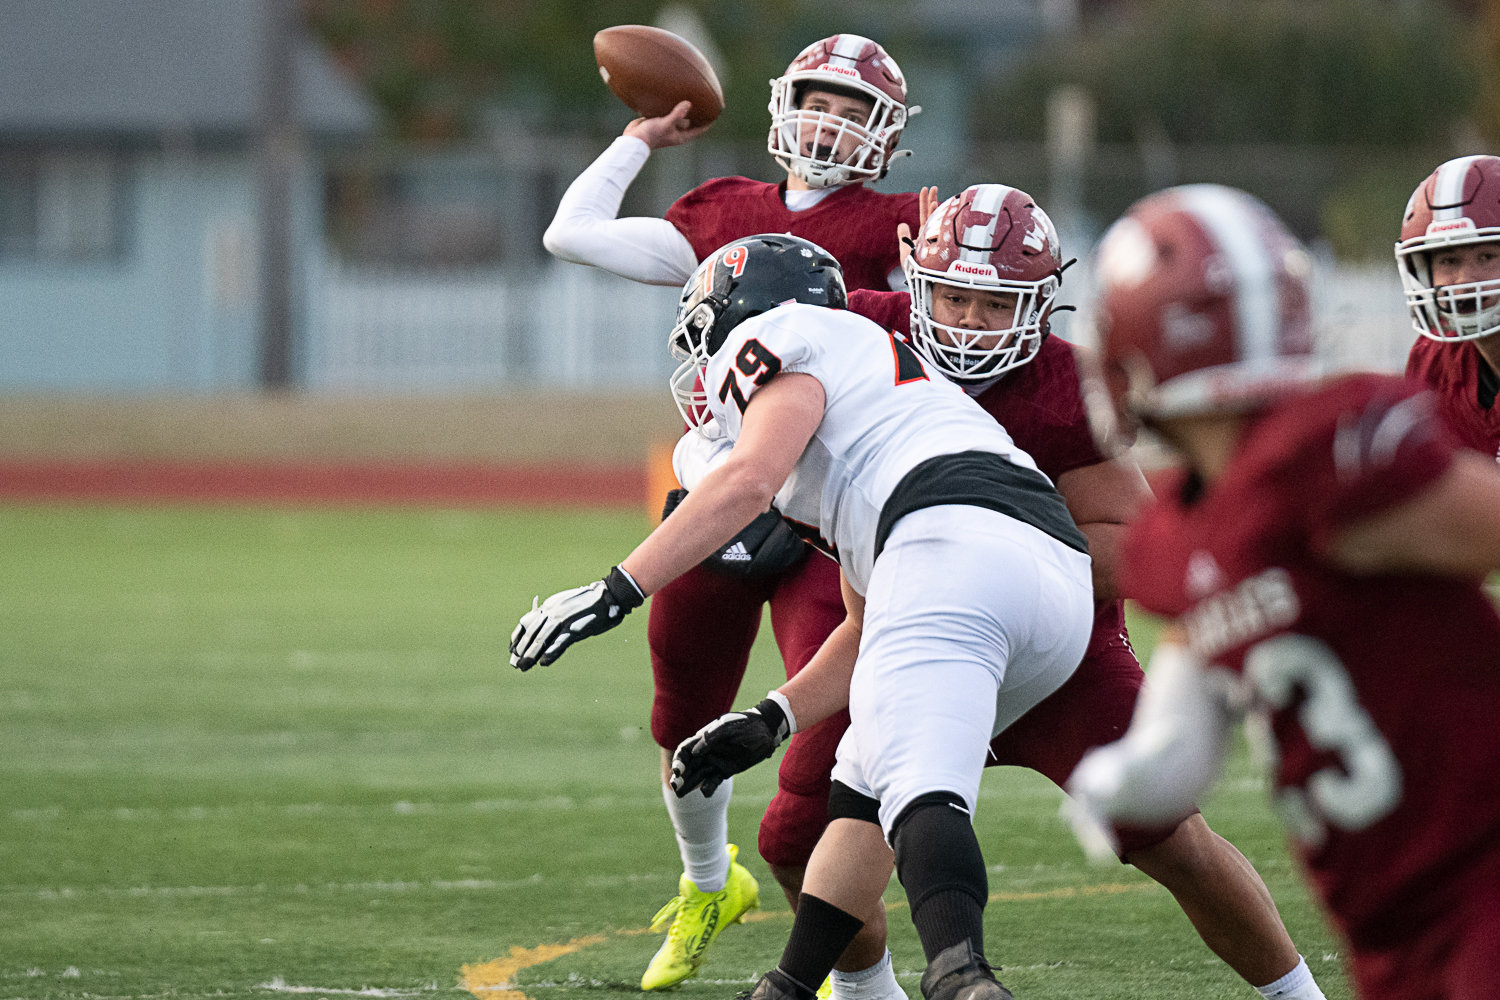 W.F. West quarterback Gavin Fugate looks to throw against Ephrata Nov. 11 at Centralia Tiger Stadium in the first round of the state playoffs.